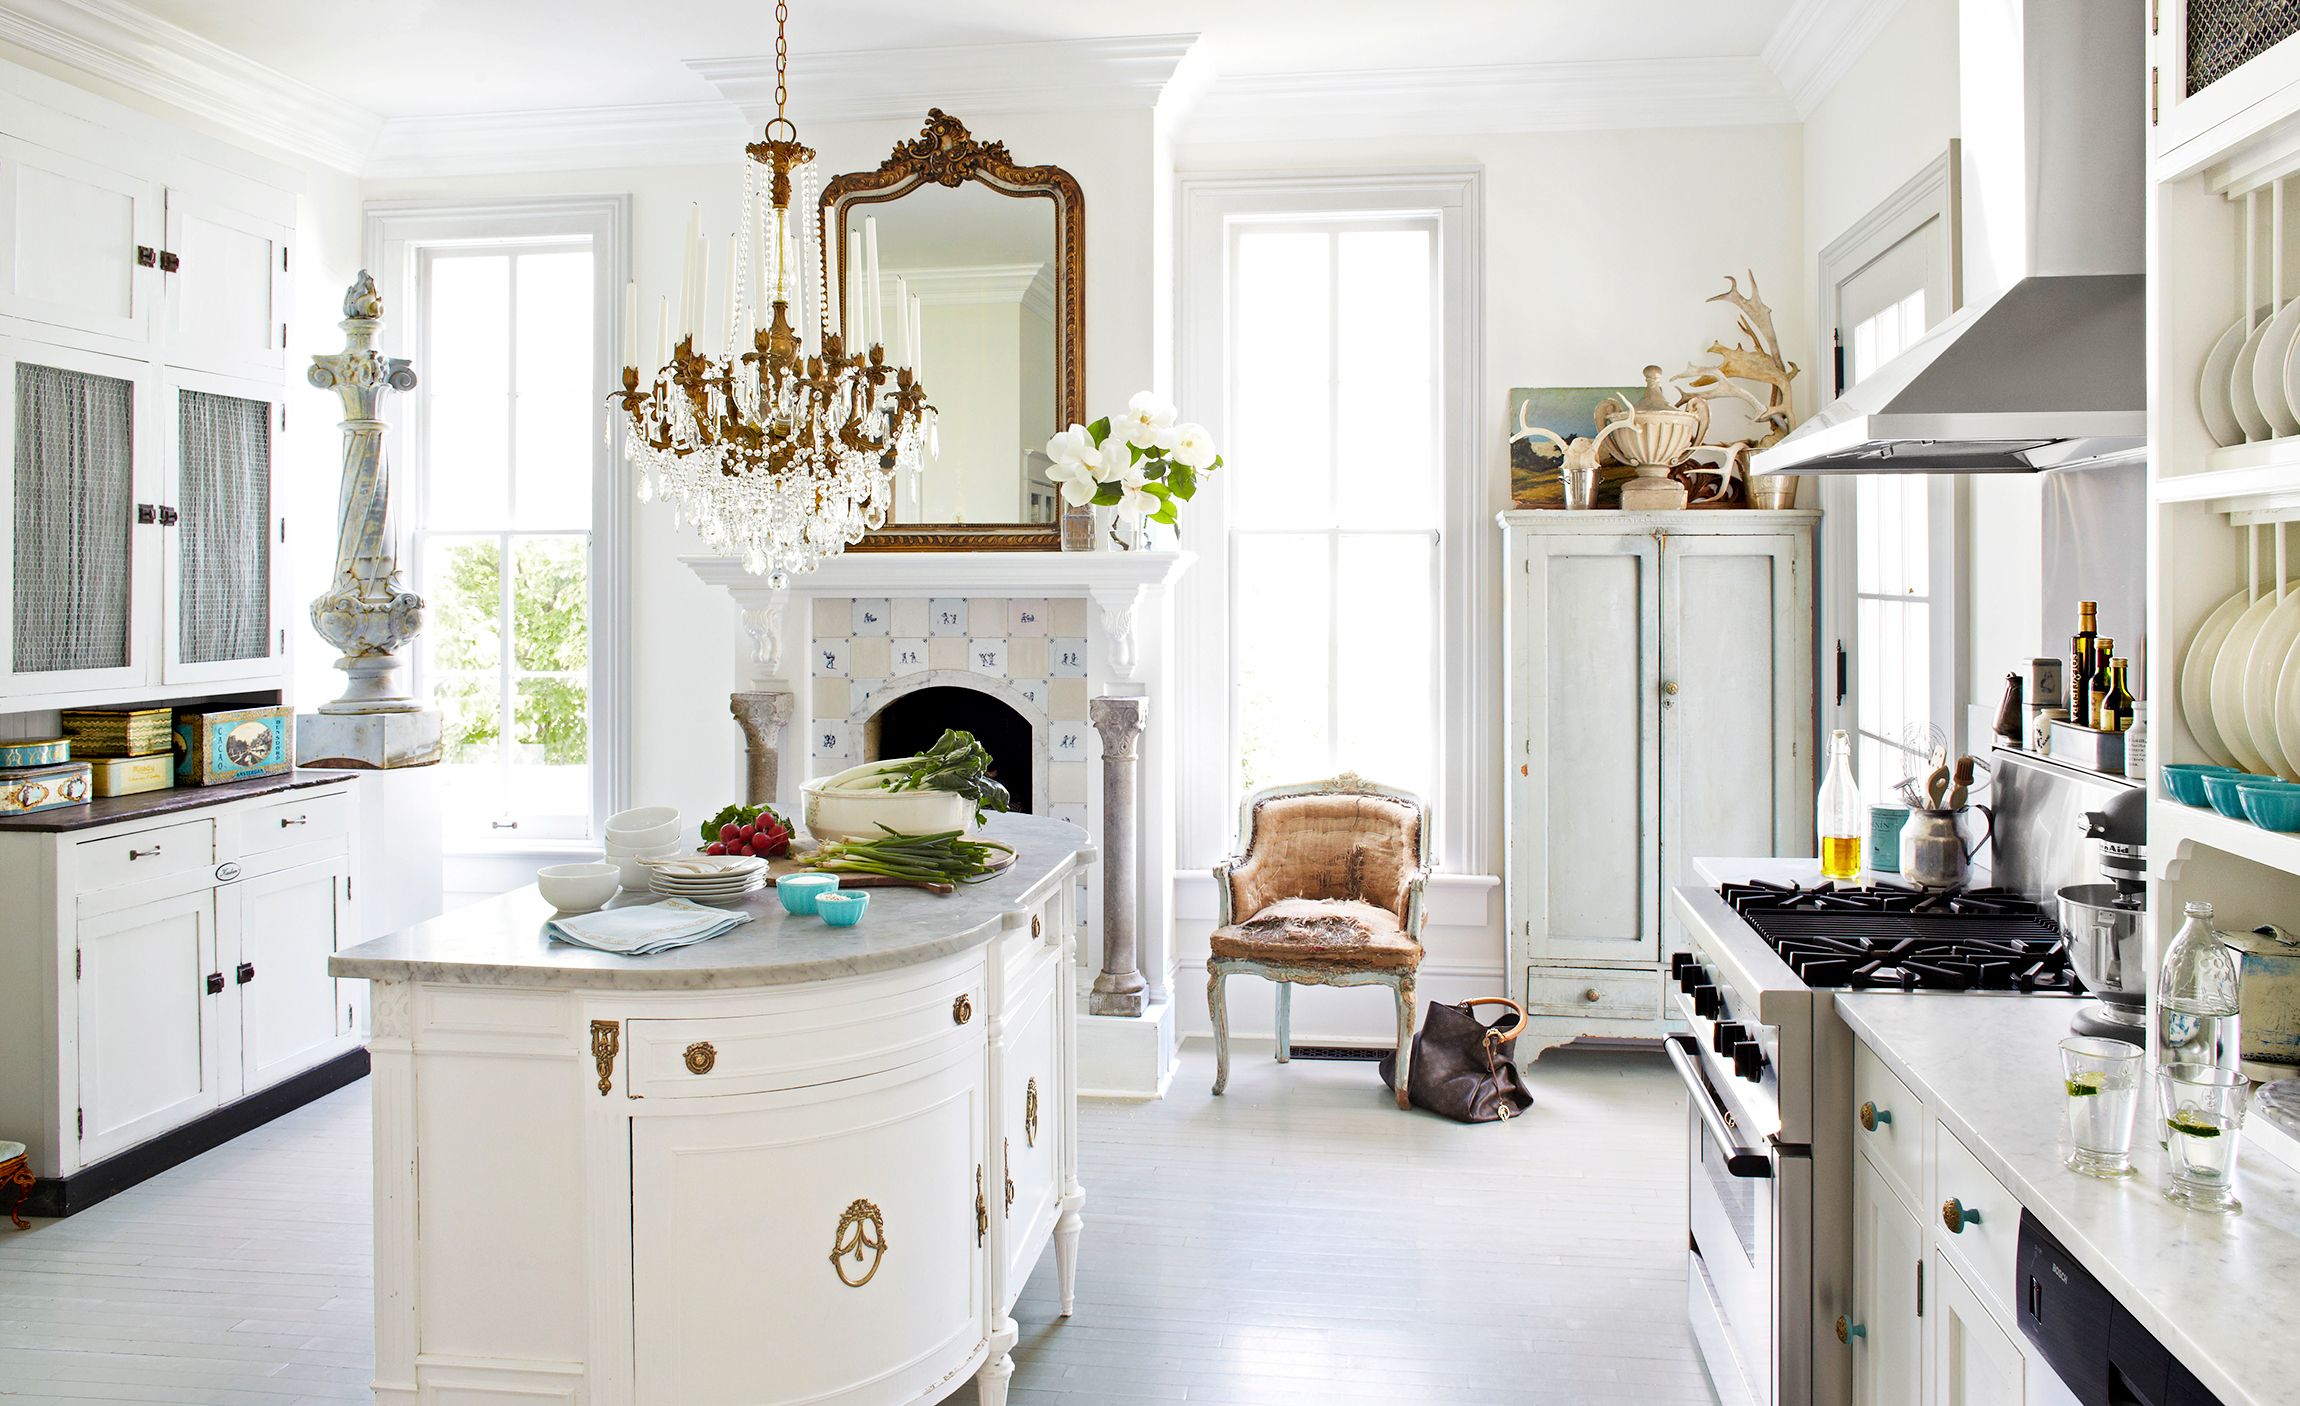 20 Chic French Country Kitchens - Farmhouse Kitchen Style Inspiration